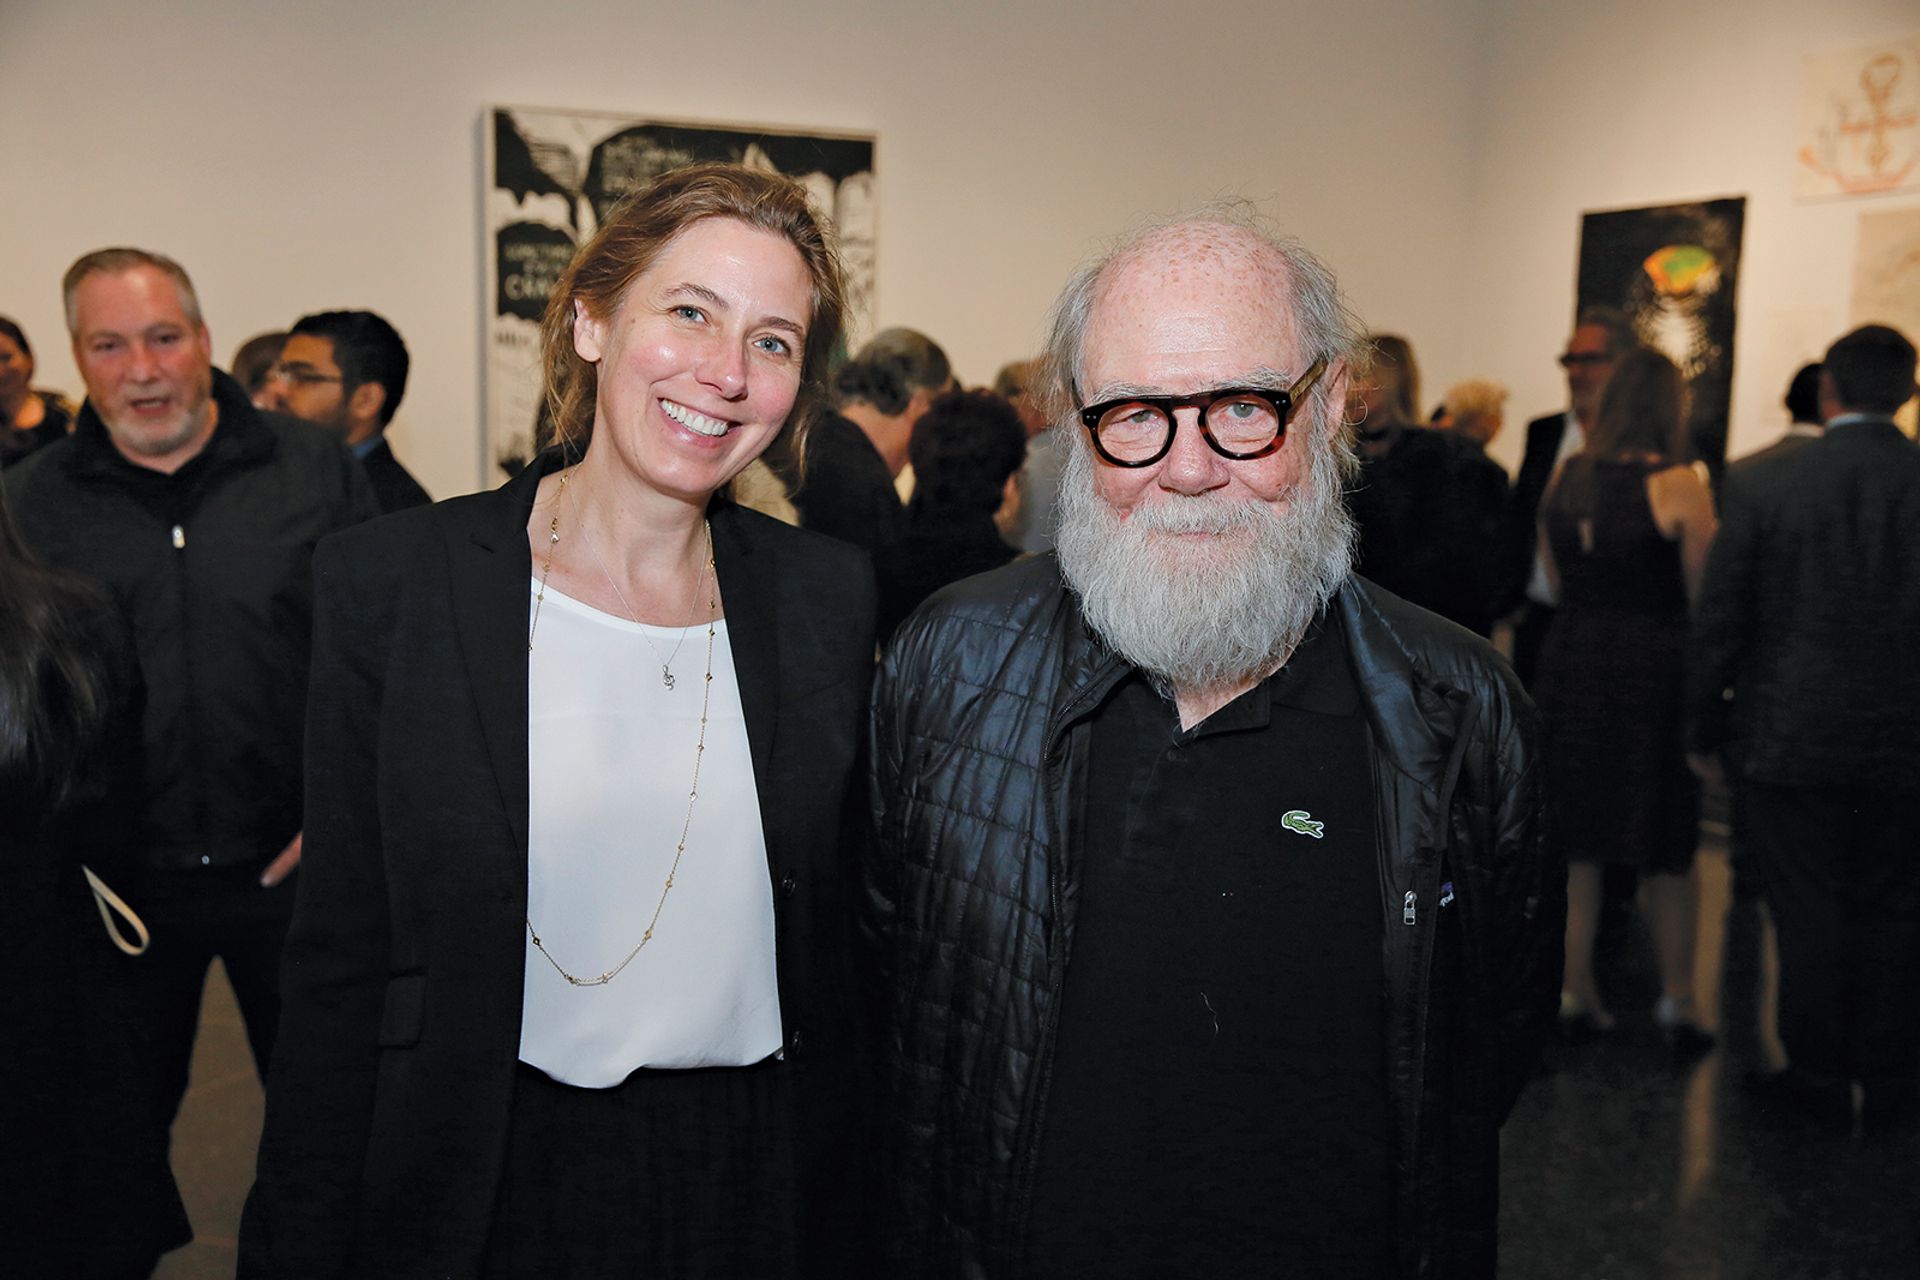 Whitney McVeigh and Paul McCarthy during the opening reception for Plato in LA Contemporary Artists’s Visions at the The Getty Villa Photo by Ryan Miller/Capture Imaging